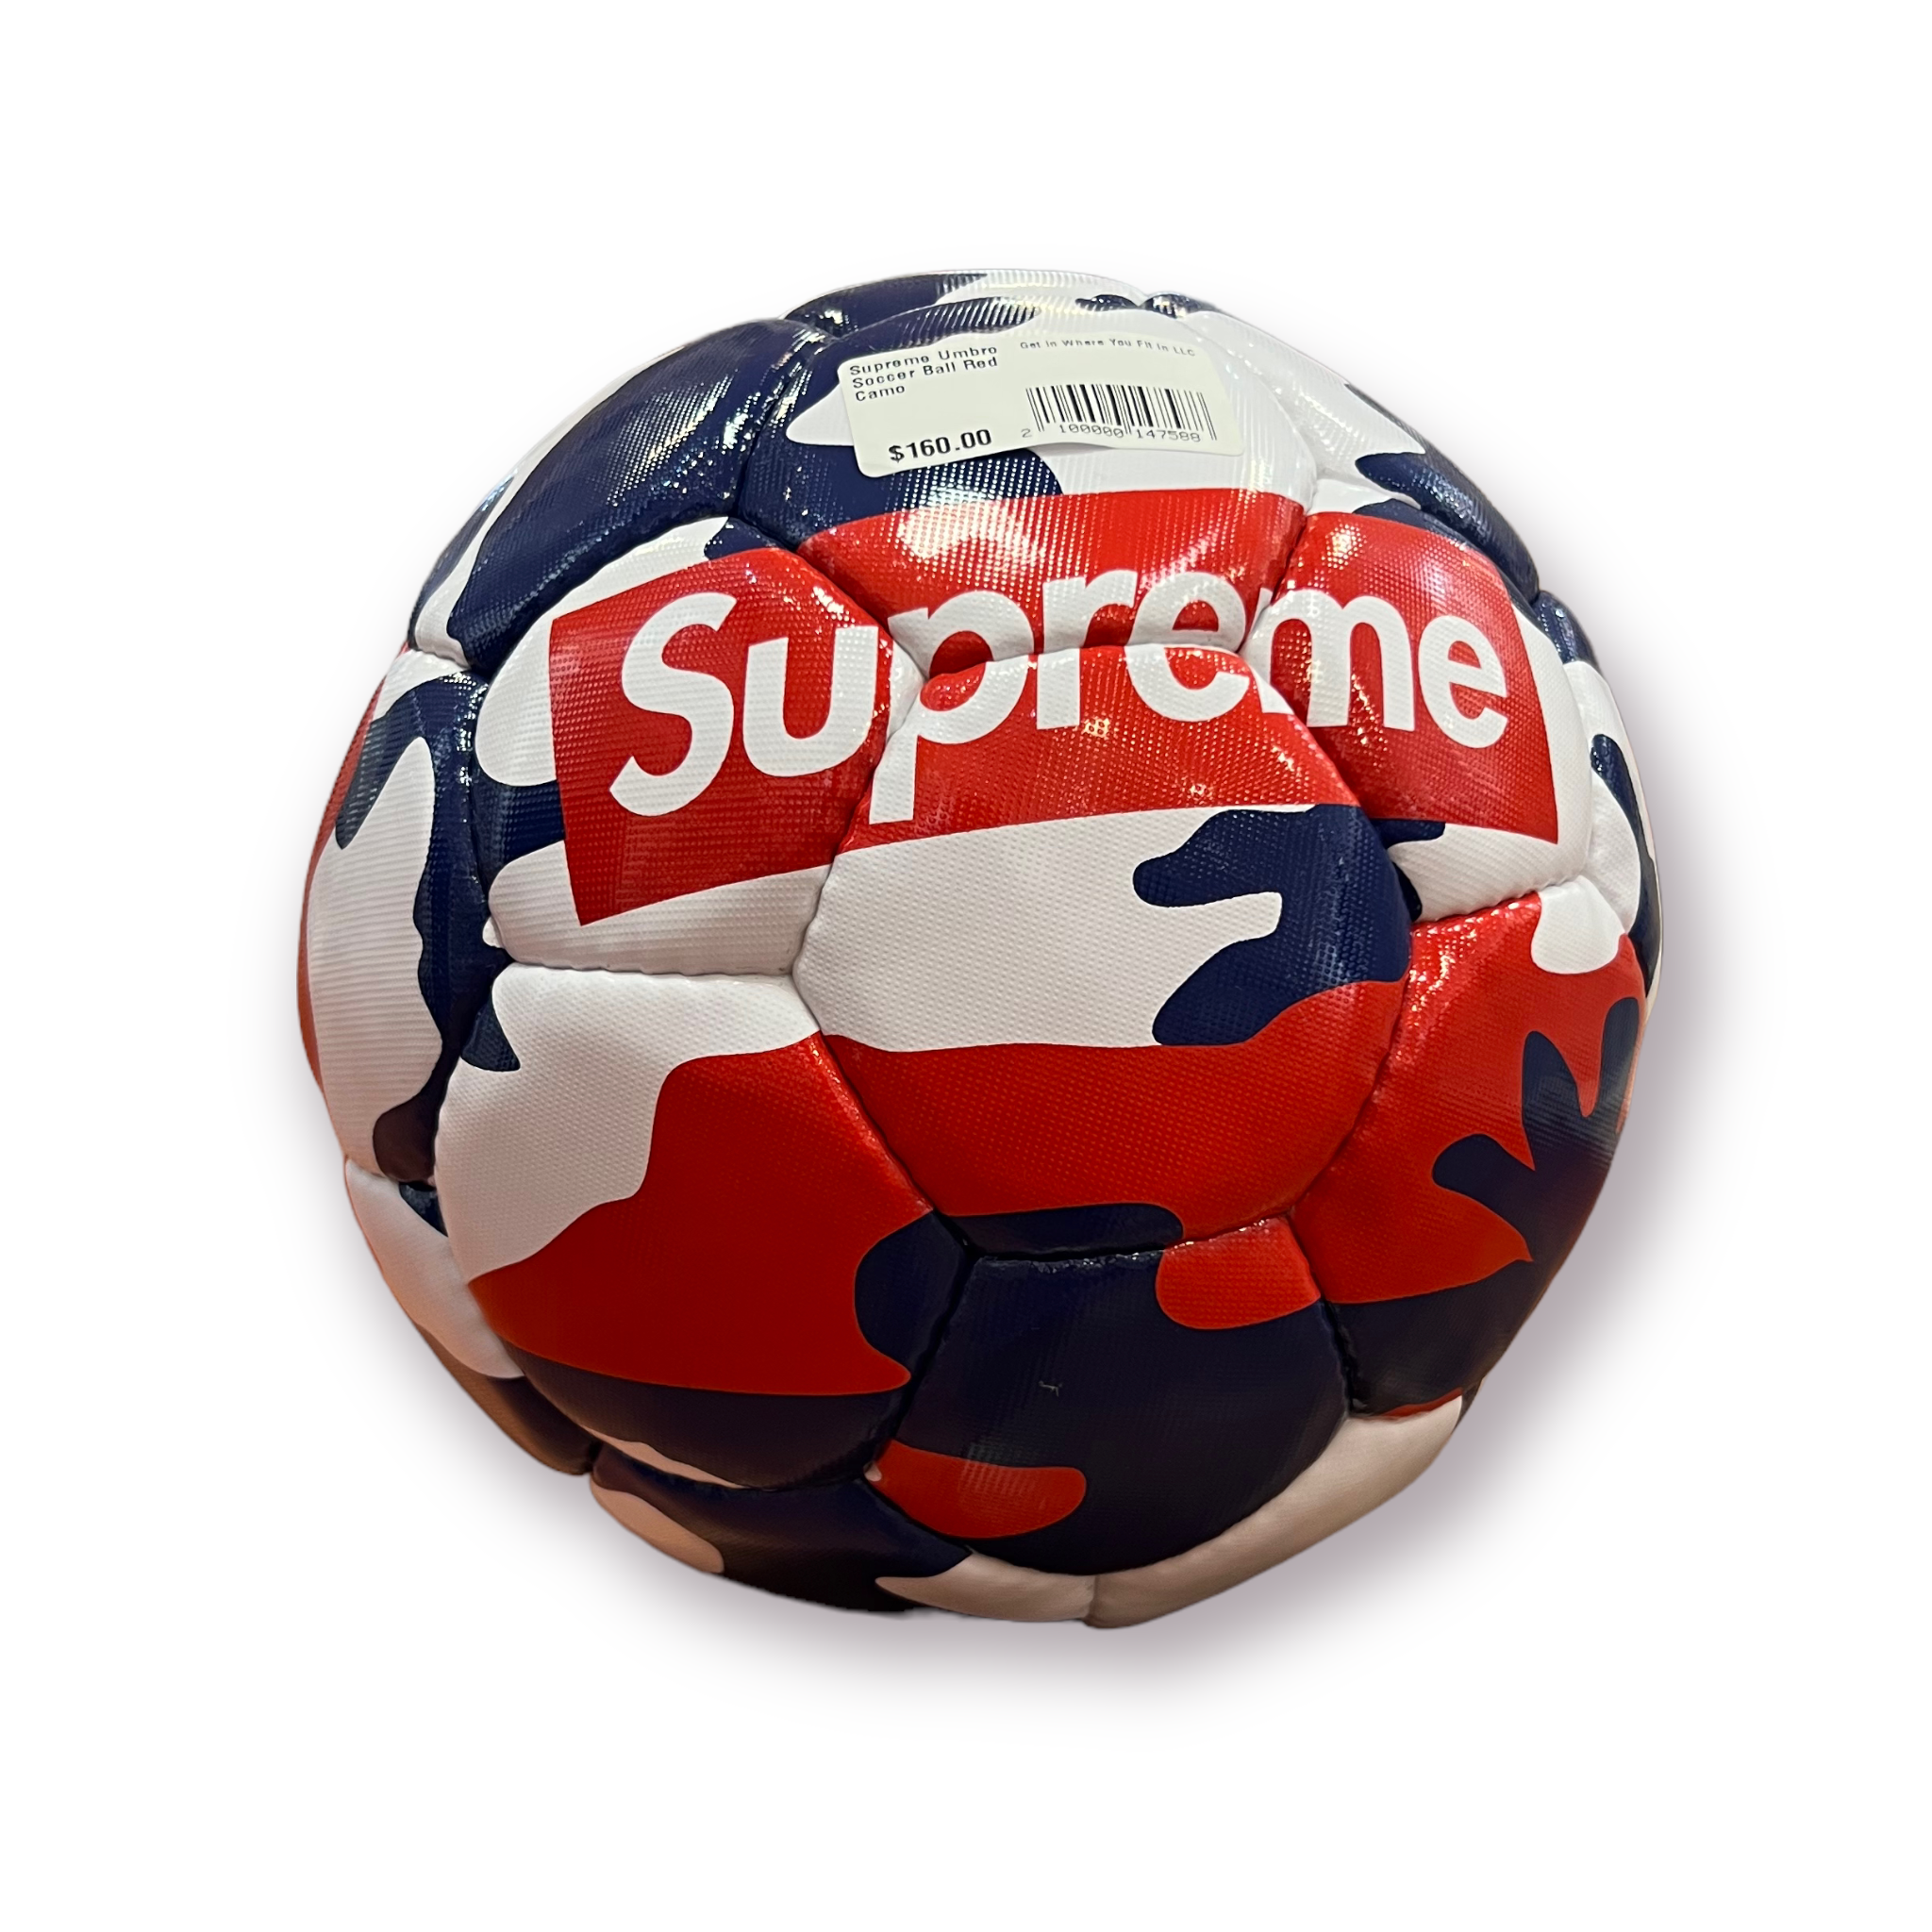 Supreme Umbro Soccer Ball Red Camo – Get In Where You Fit In